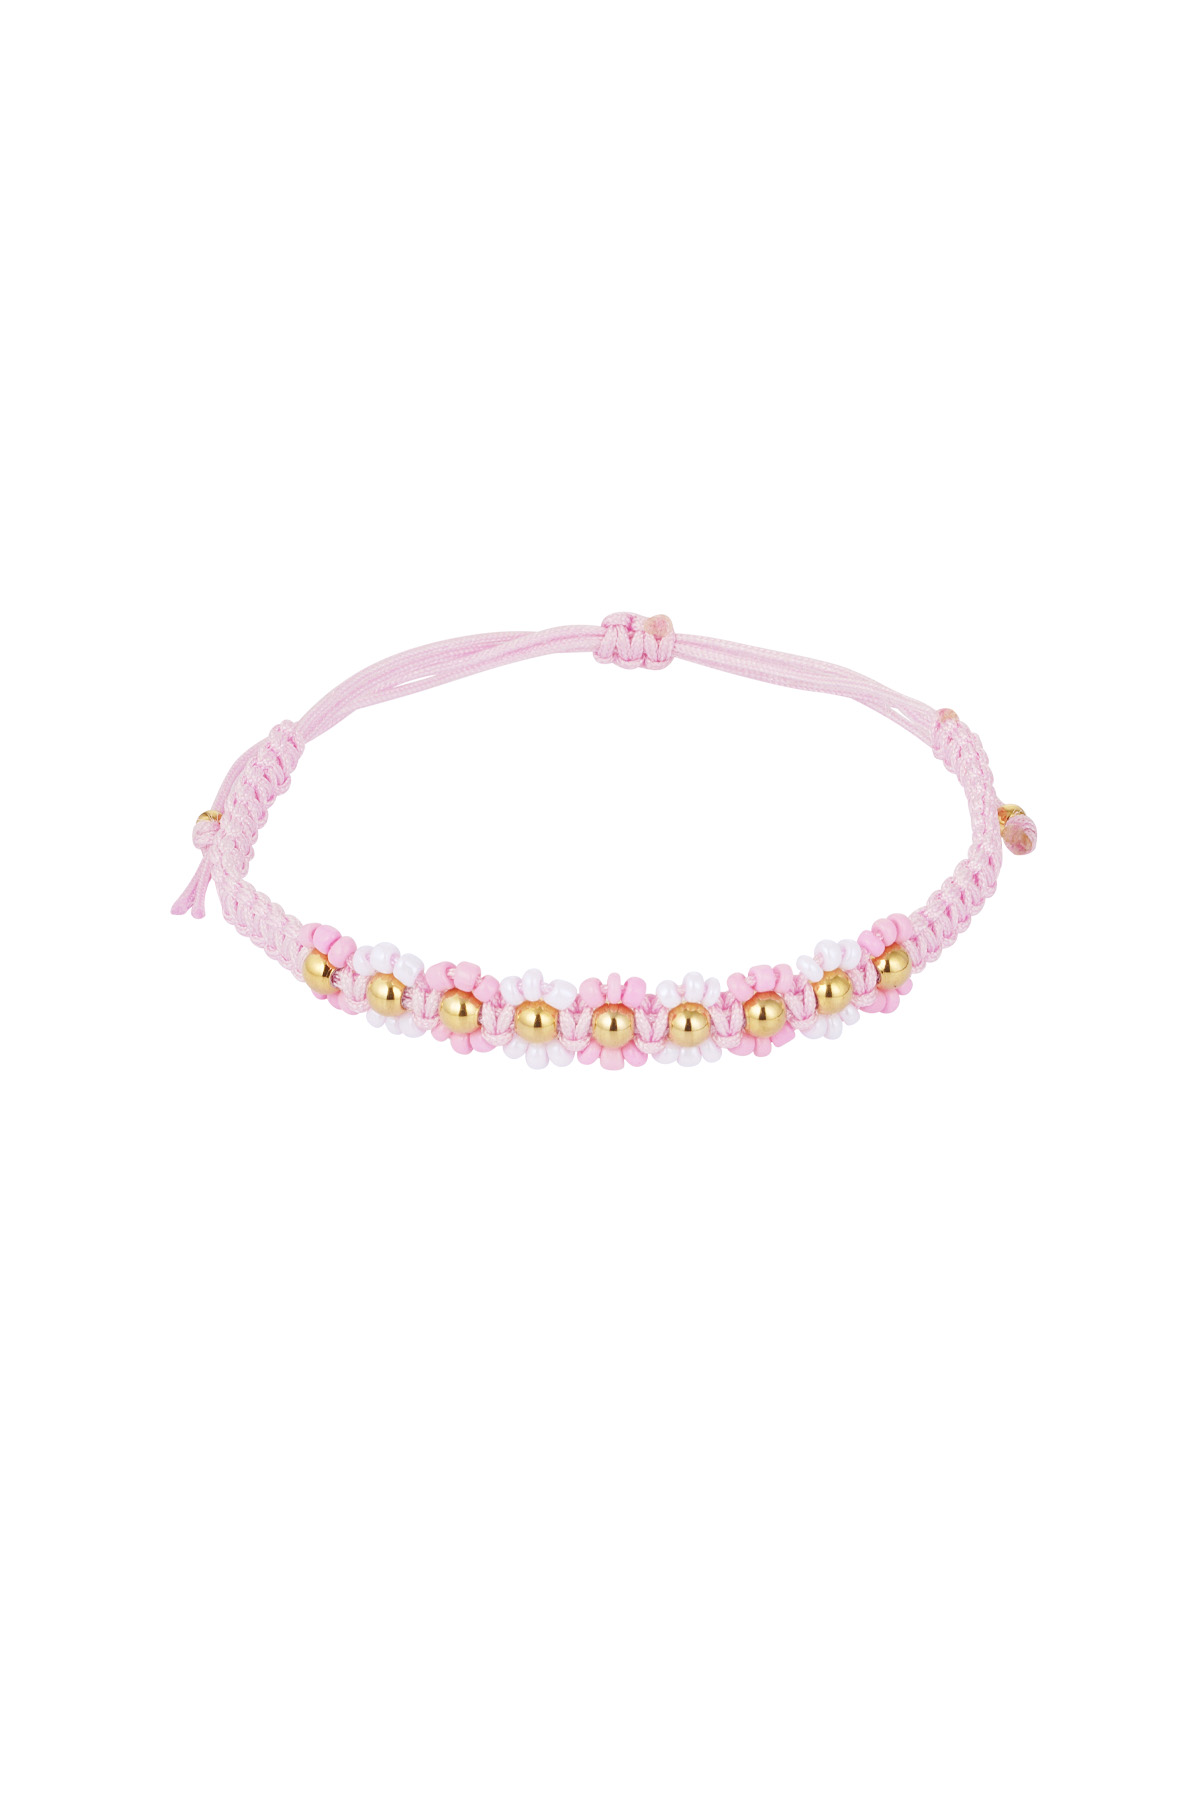 Braided bracelet with flowers - pink/gold  h5 